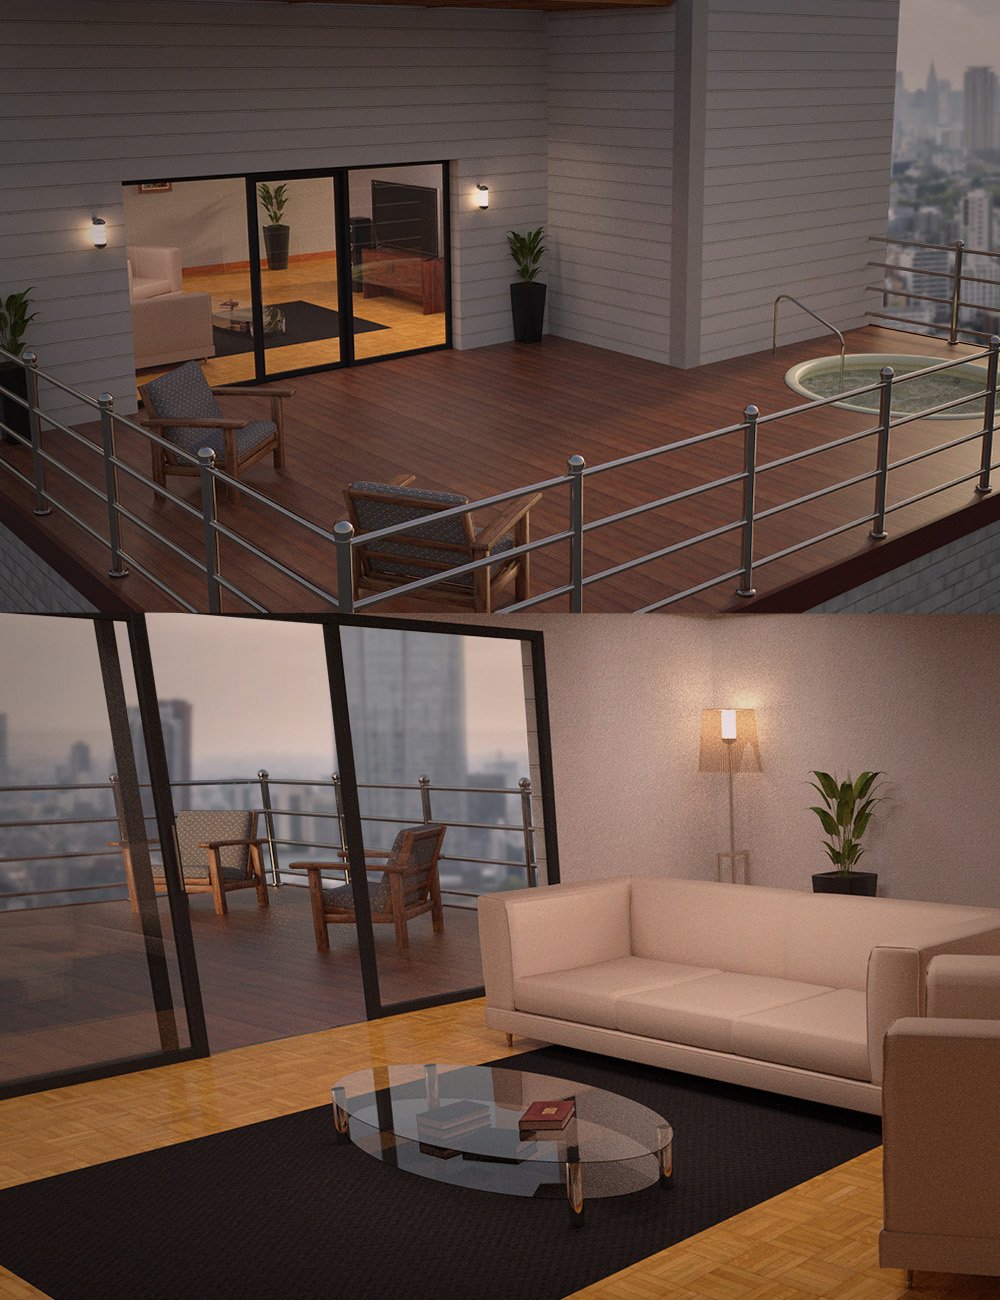 Apartment Living Room and Patio Jacuzzi by: , 3D Models by Daz 3D